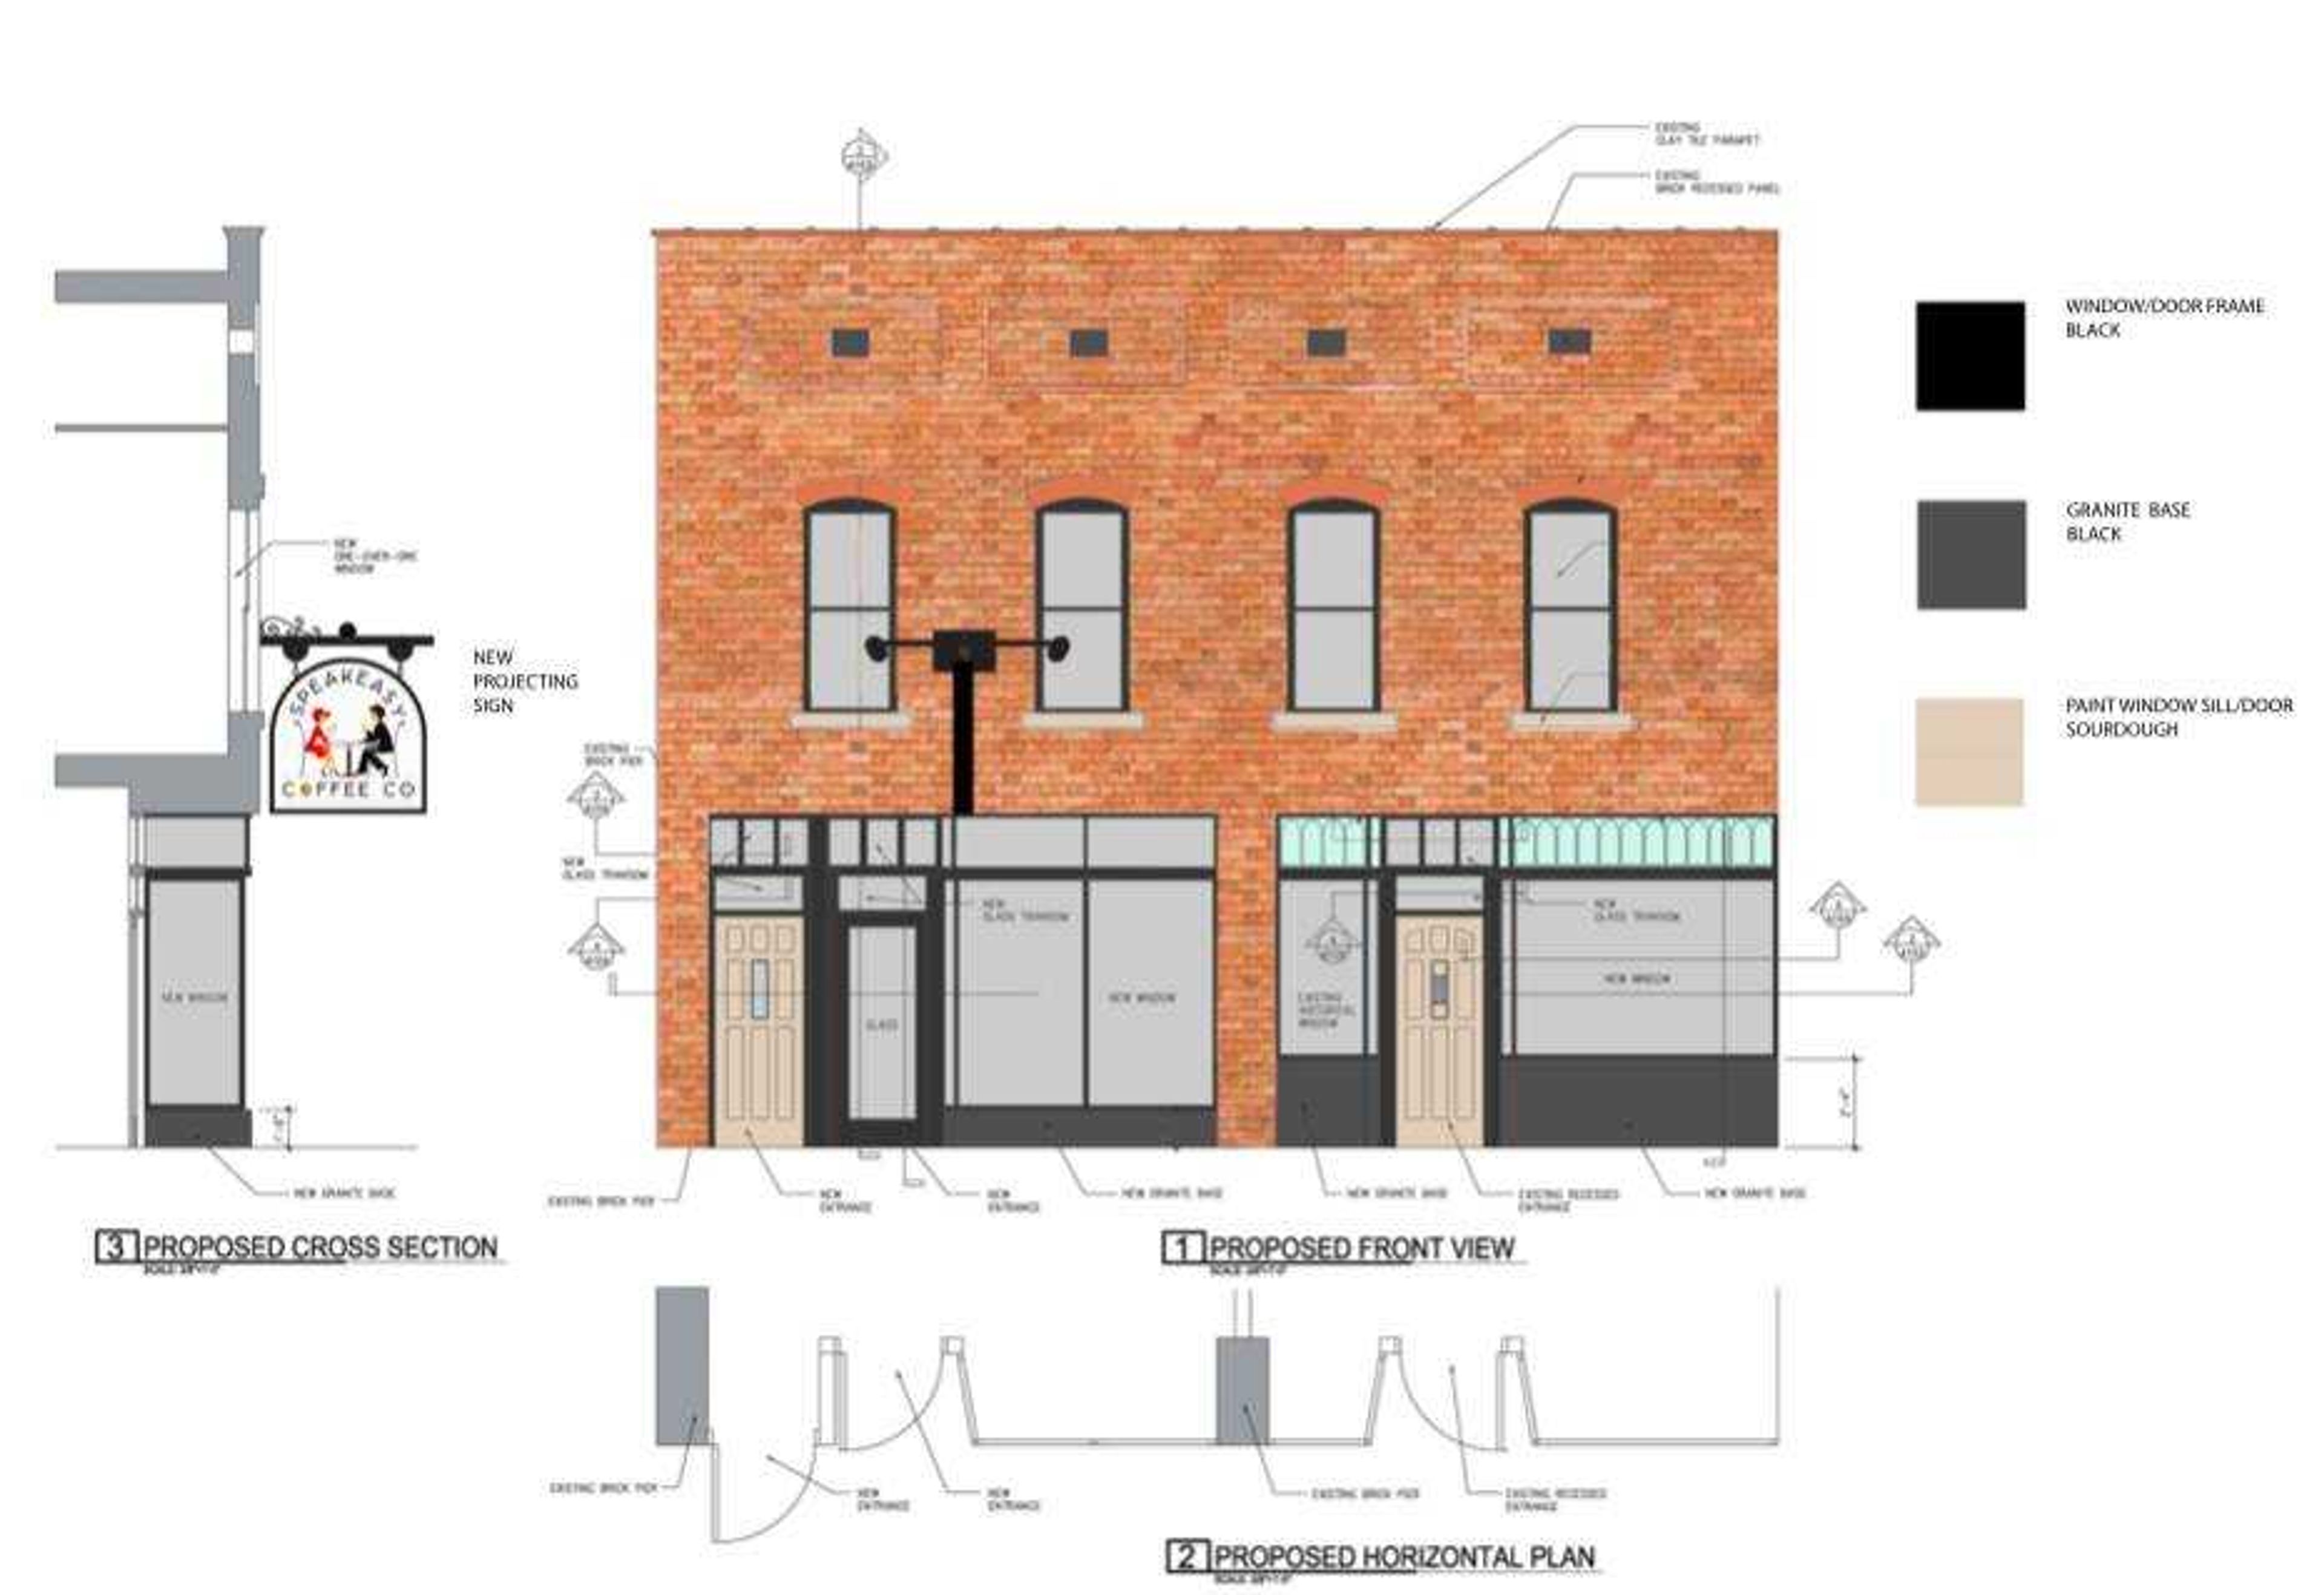 Pending approval from the City of Cape, plans for the Speakeasy Coffee Company storefront are pictured in this rendering by David Douglas Williamson, AIA Architect. 